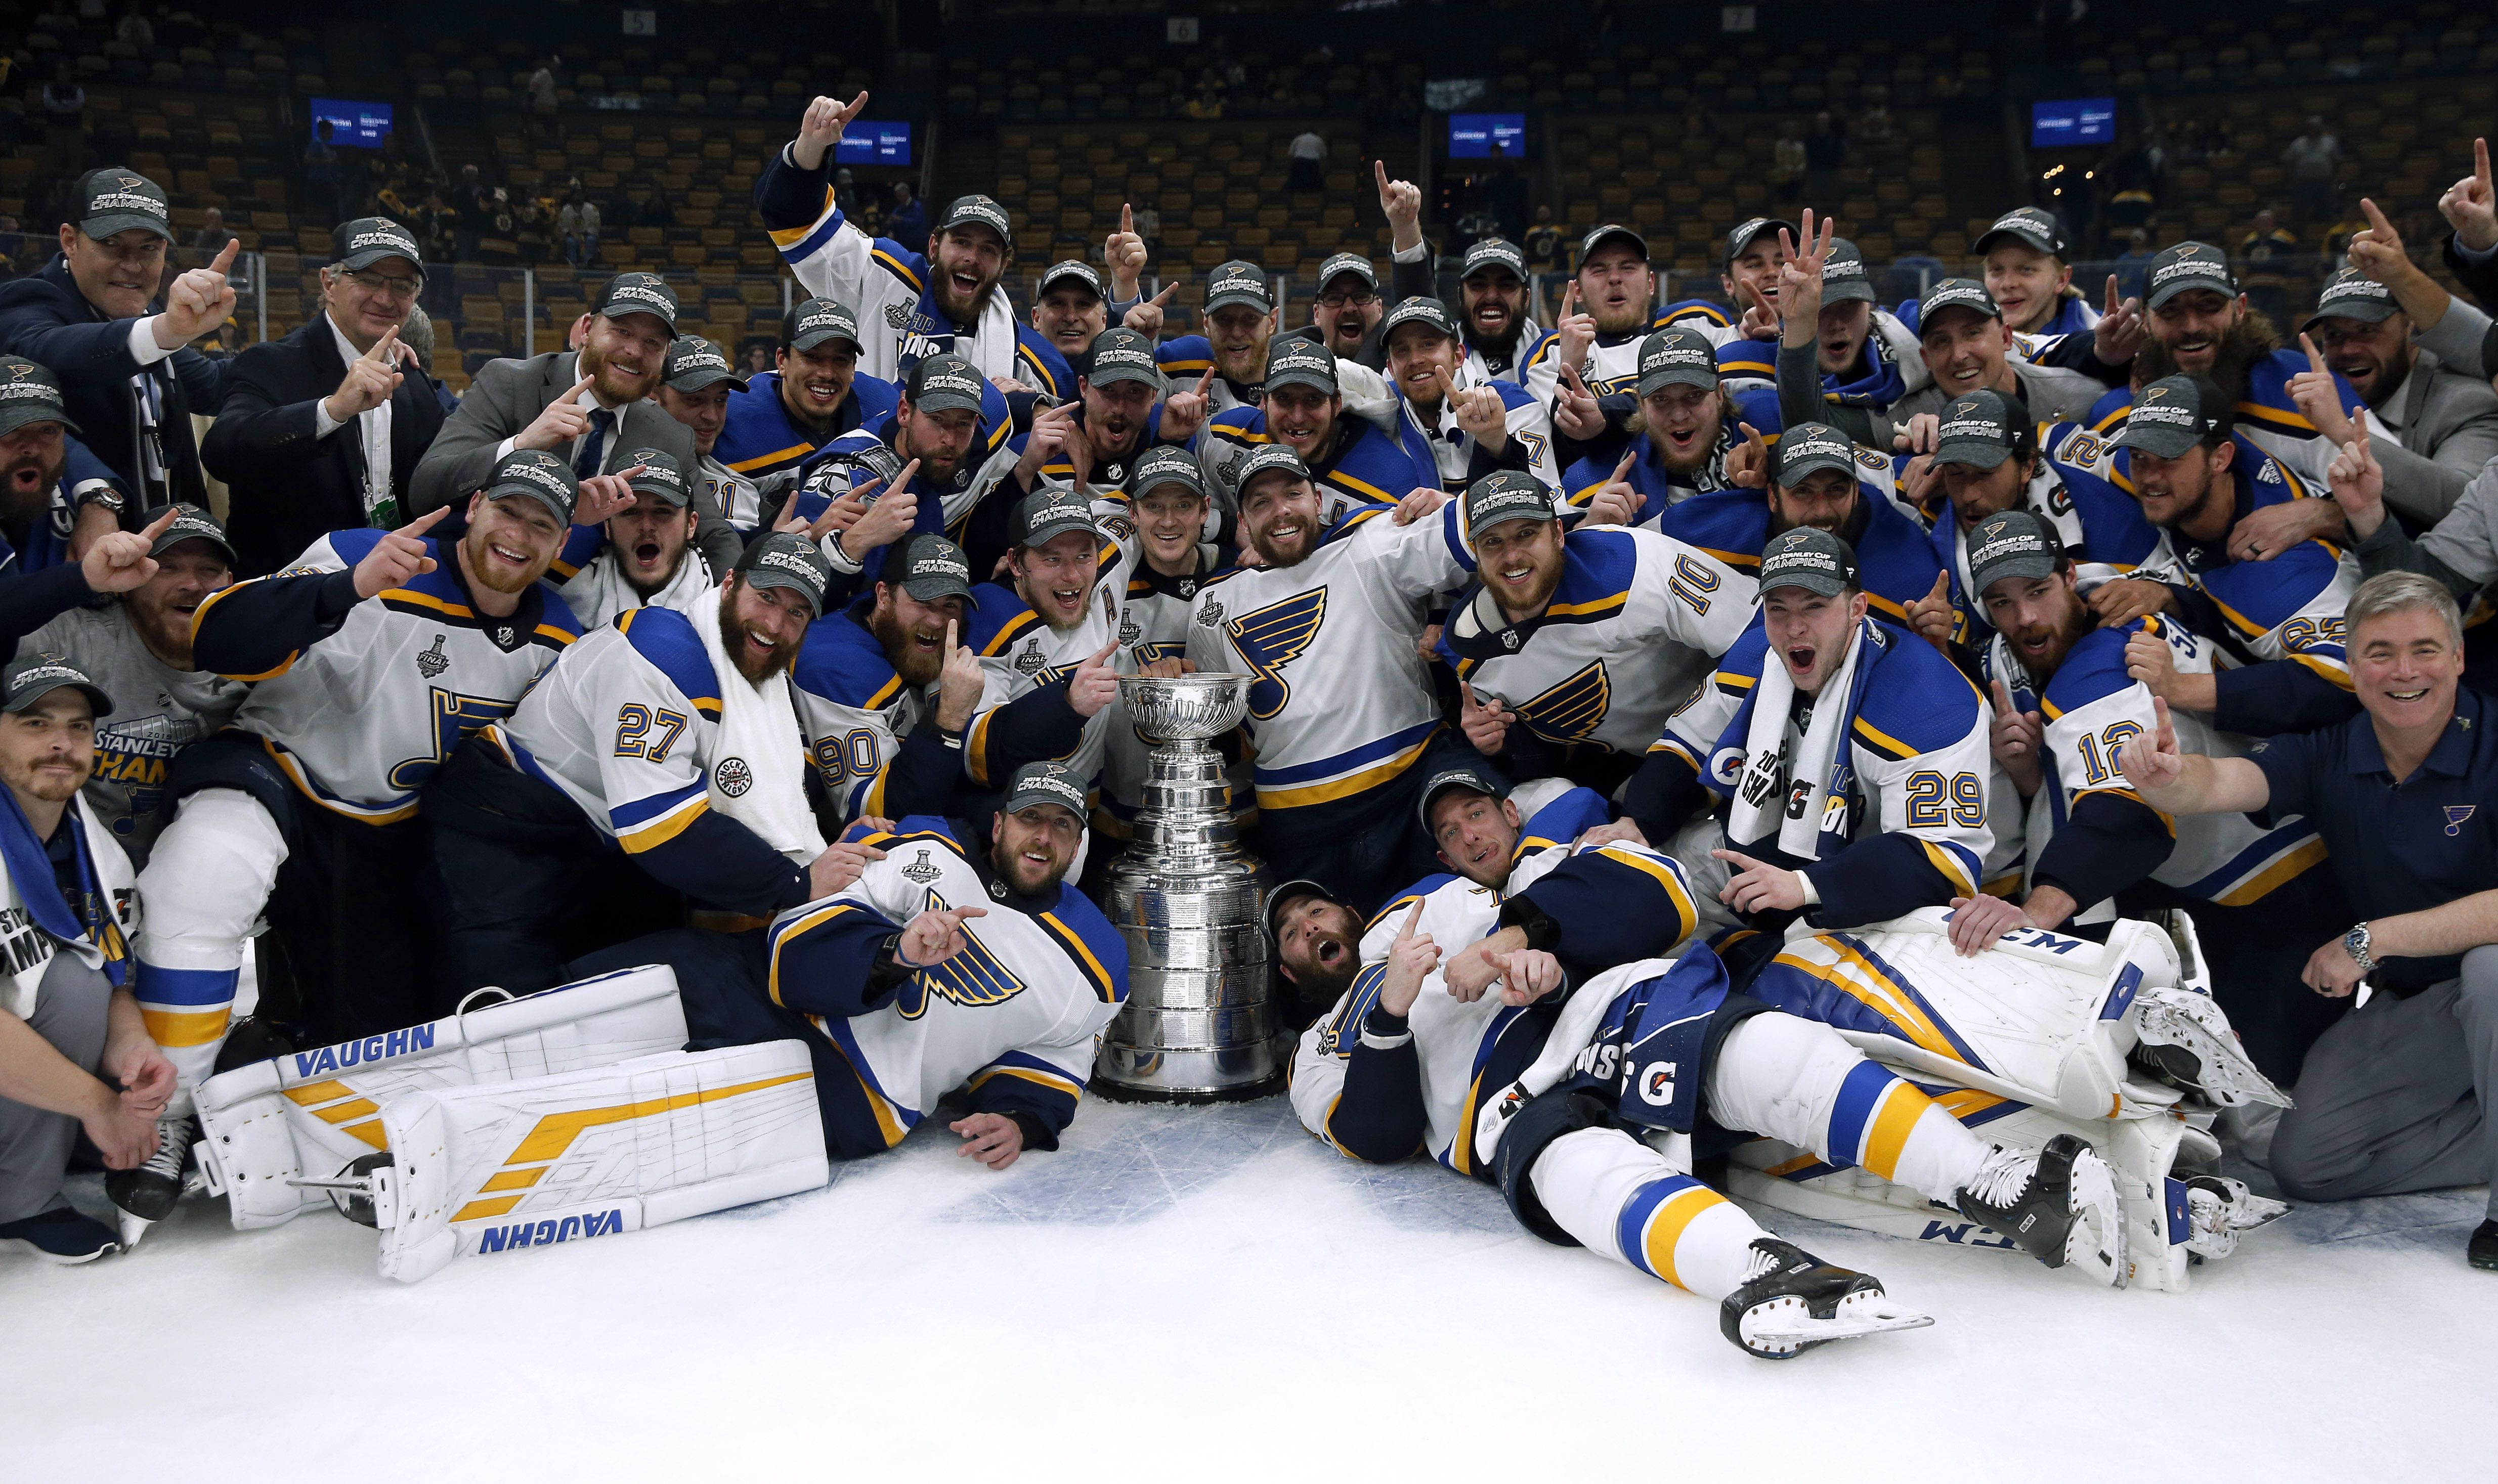 2019 NHL Stanley Cup Panoramic Picture - St. Louis Blues